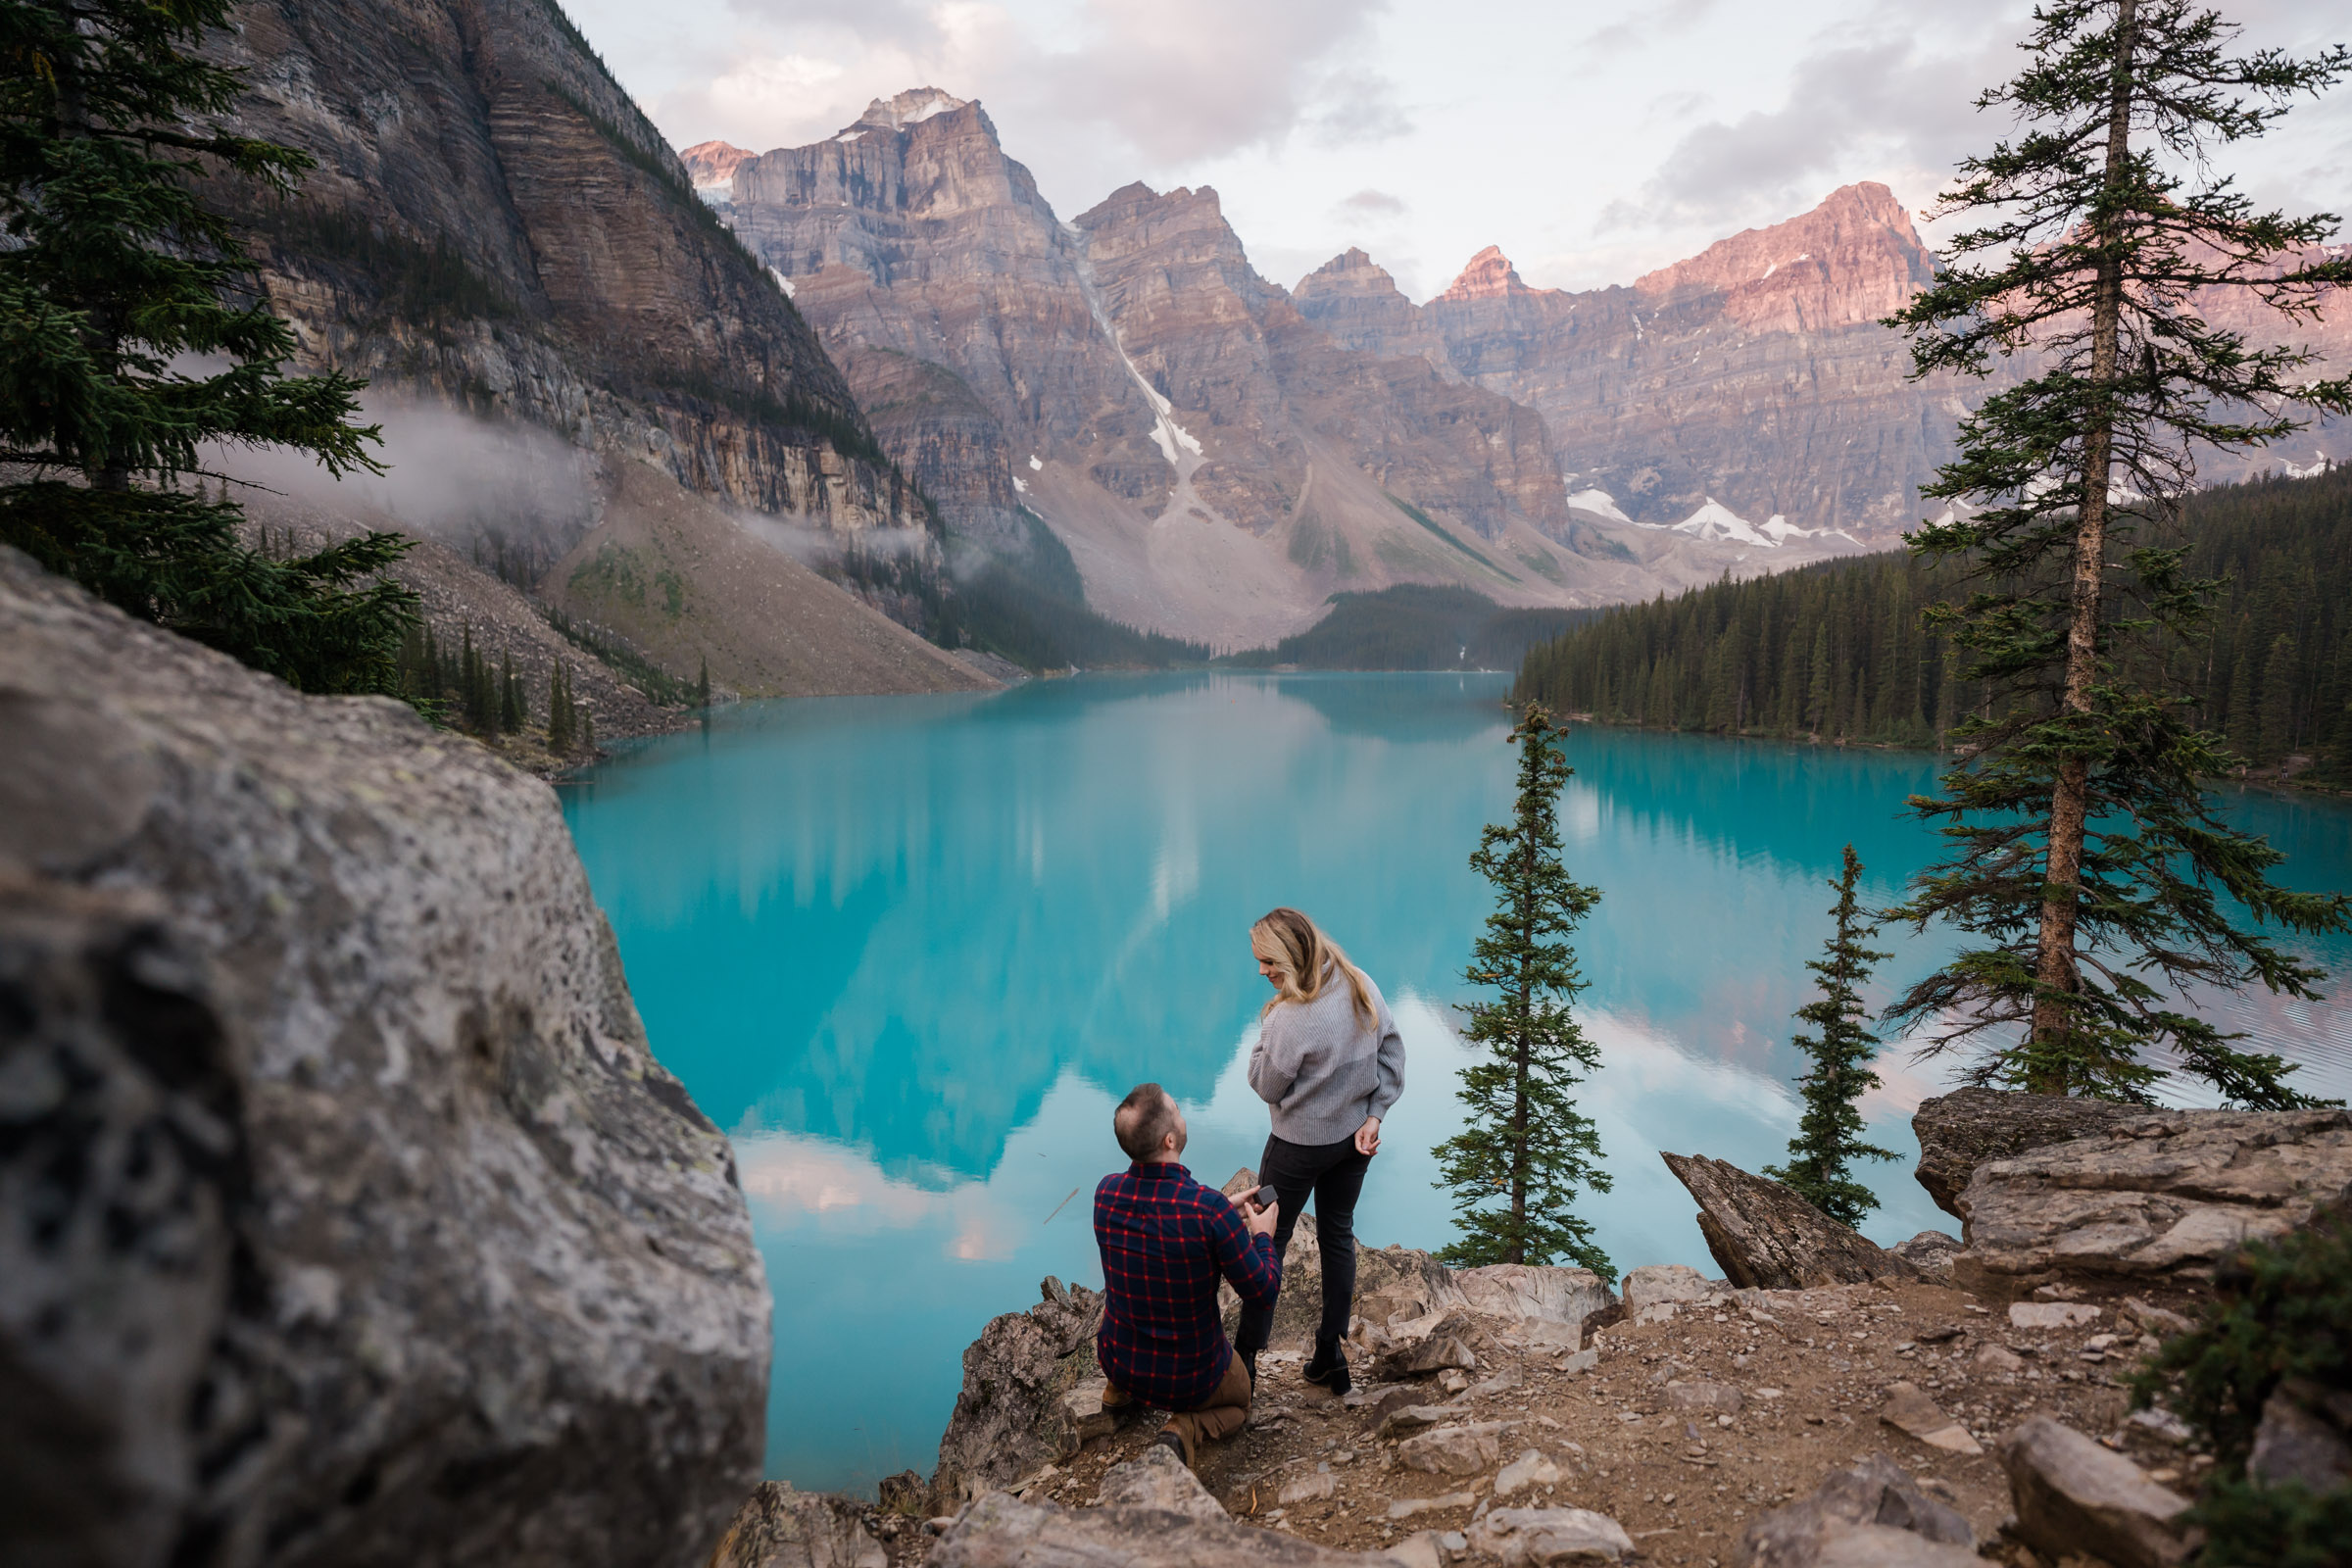 Man kneels on the ground while his girlfriend is turning around to see him proposing in front of sunrise at Moraine lake.